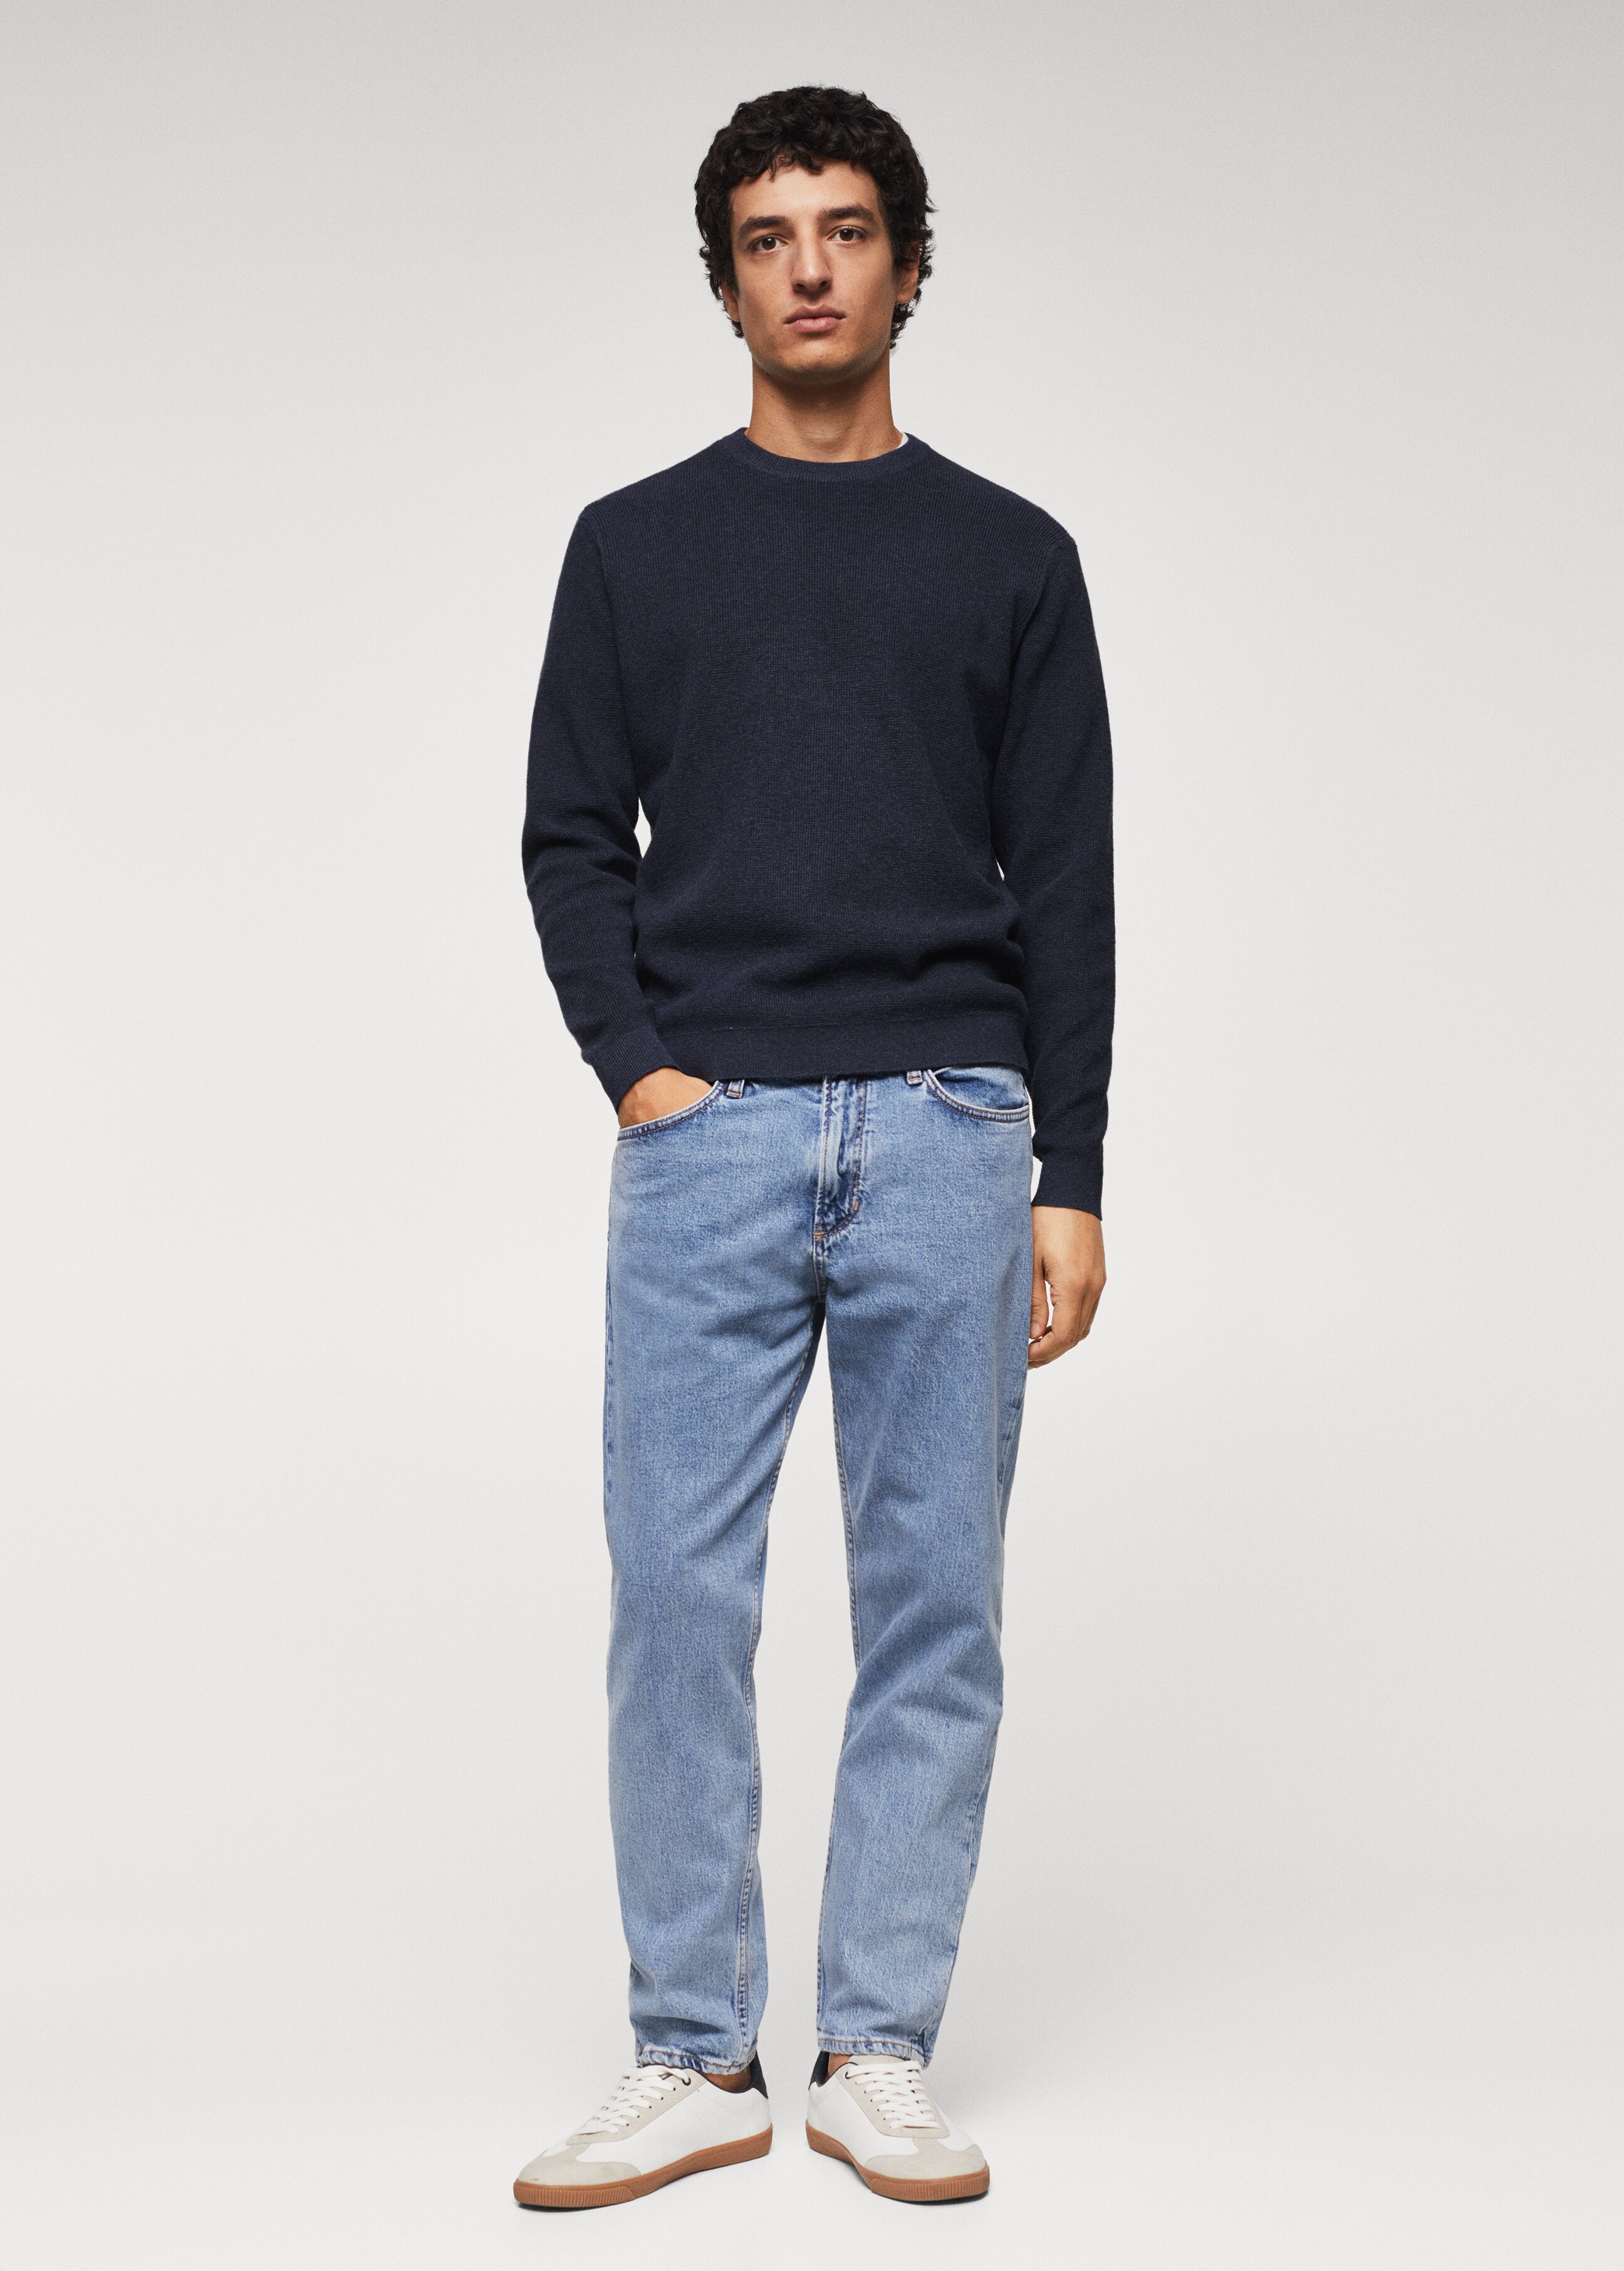 Structured cotton sweater - General plane